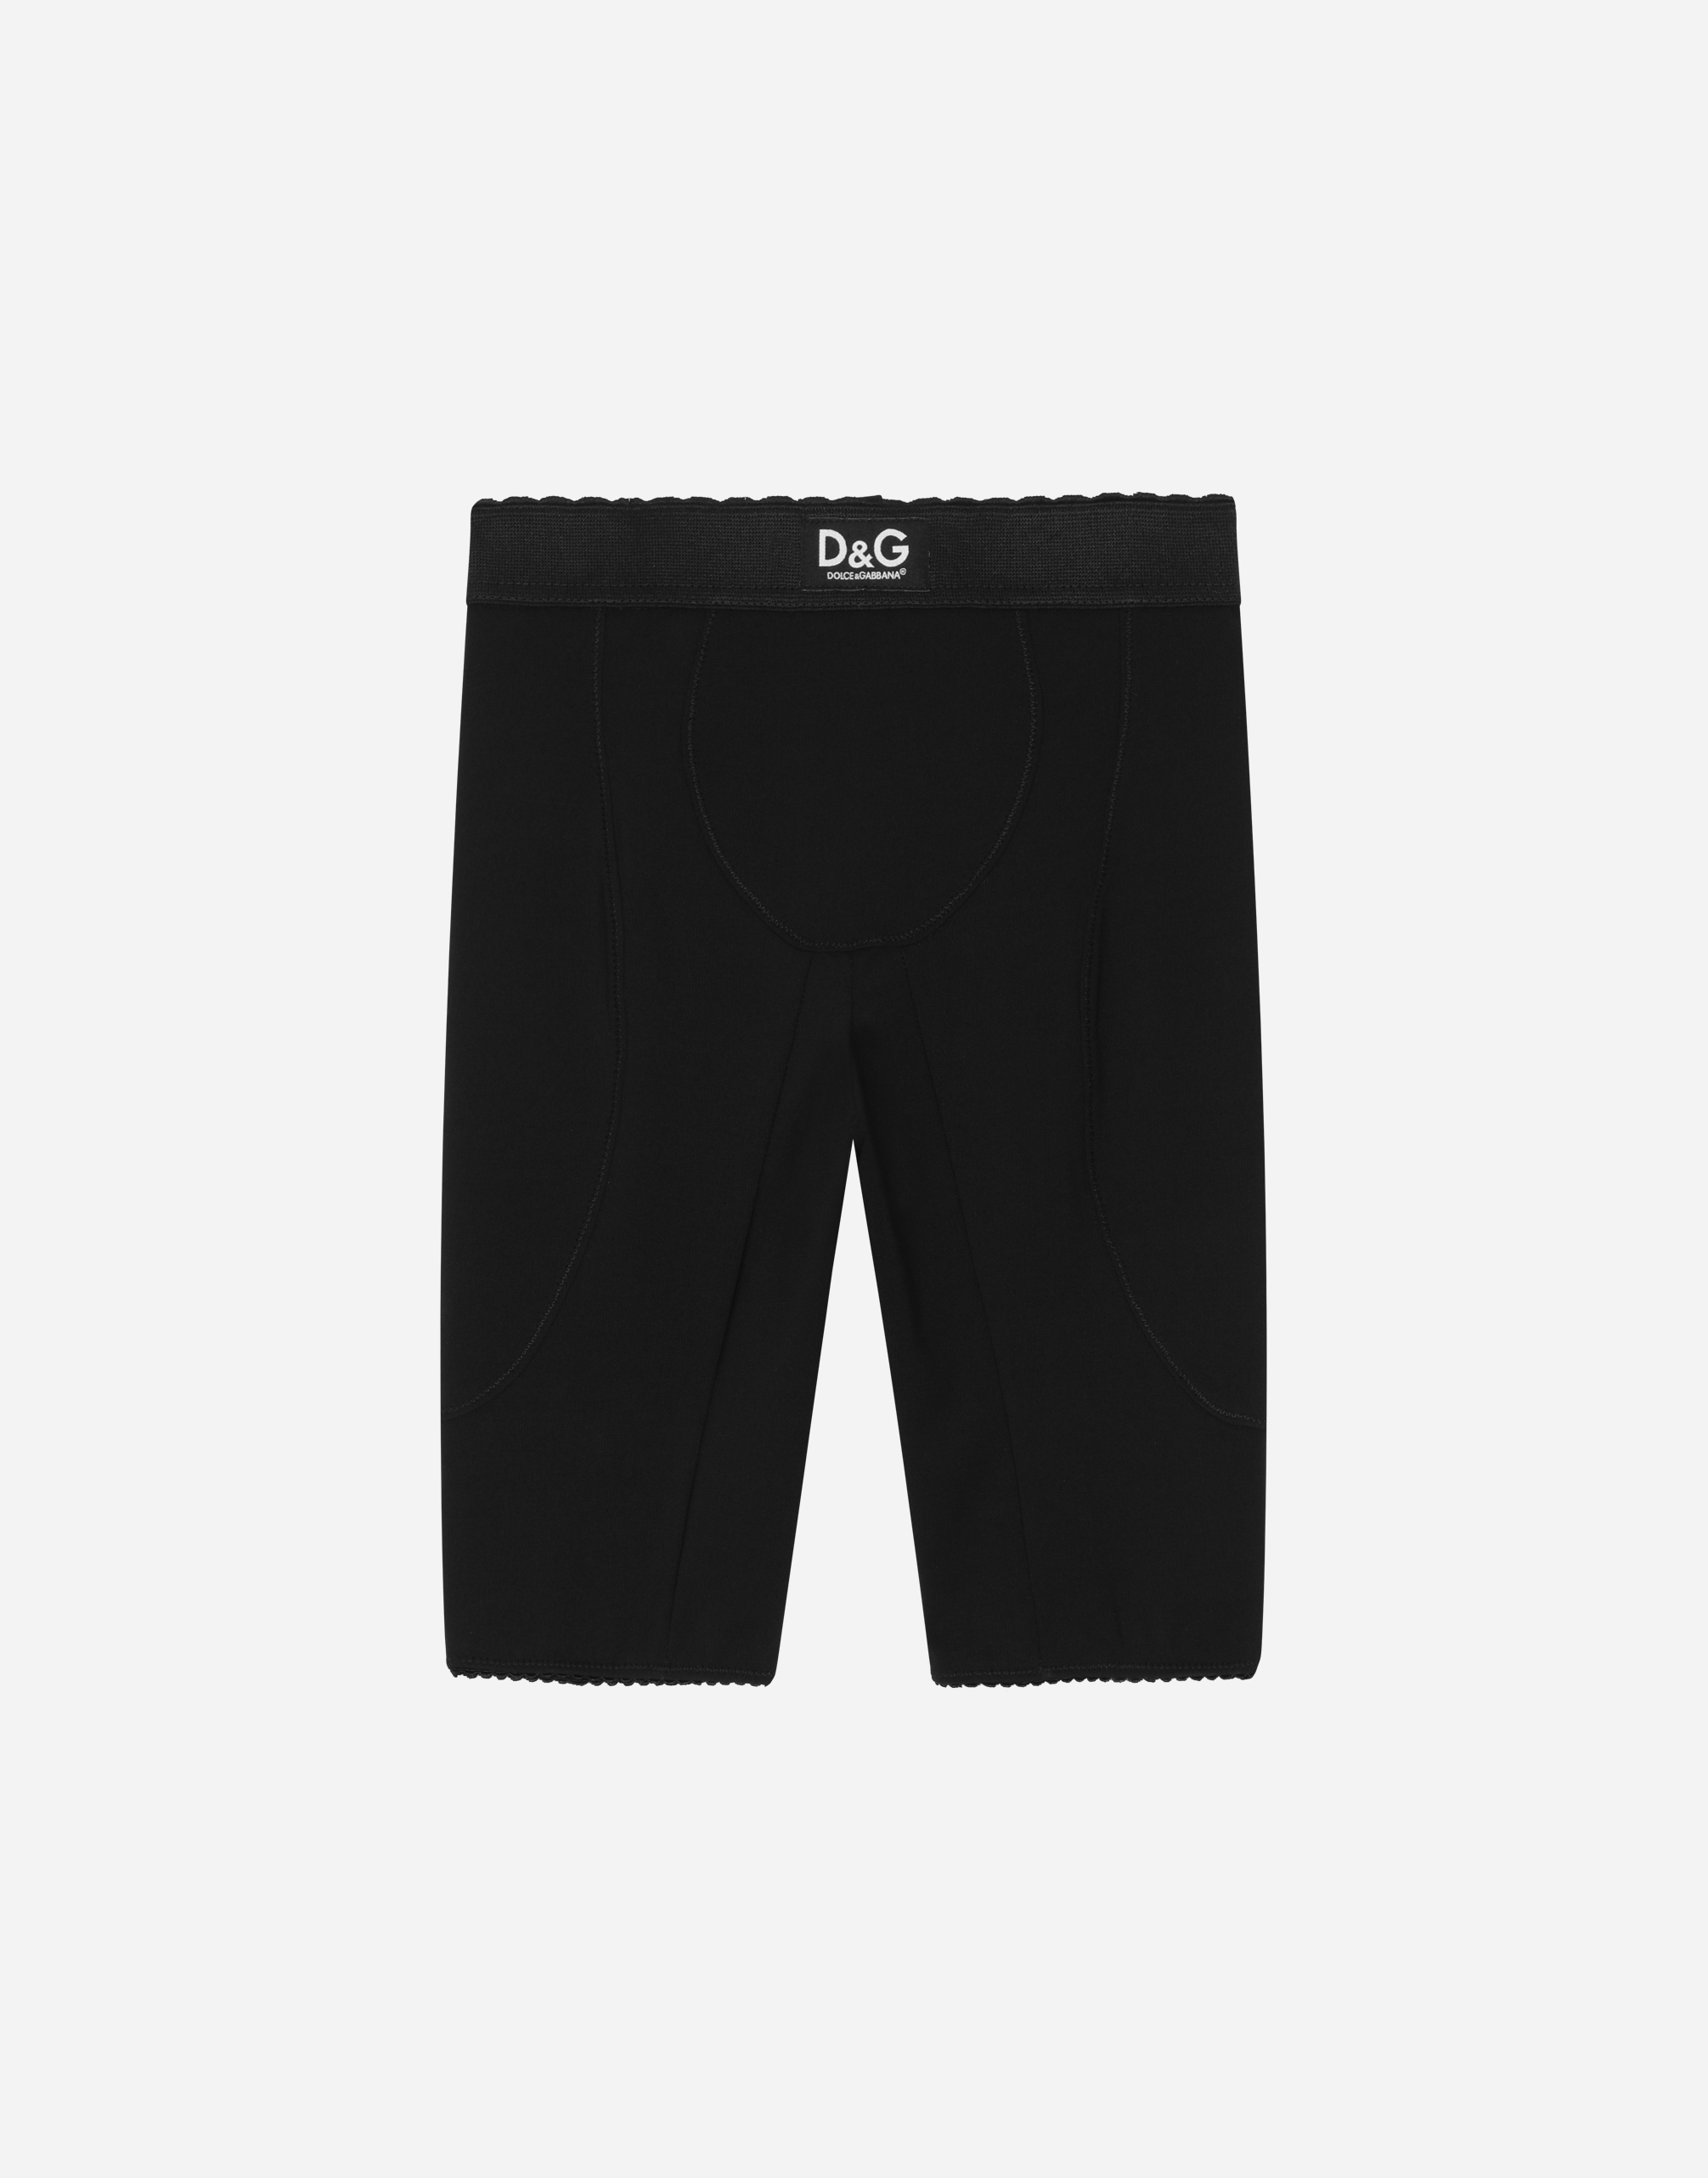 Technical jersey cycling shorts with D&G label in Black